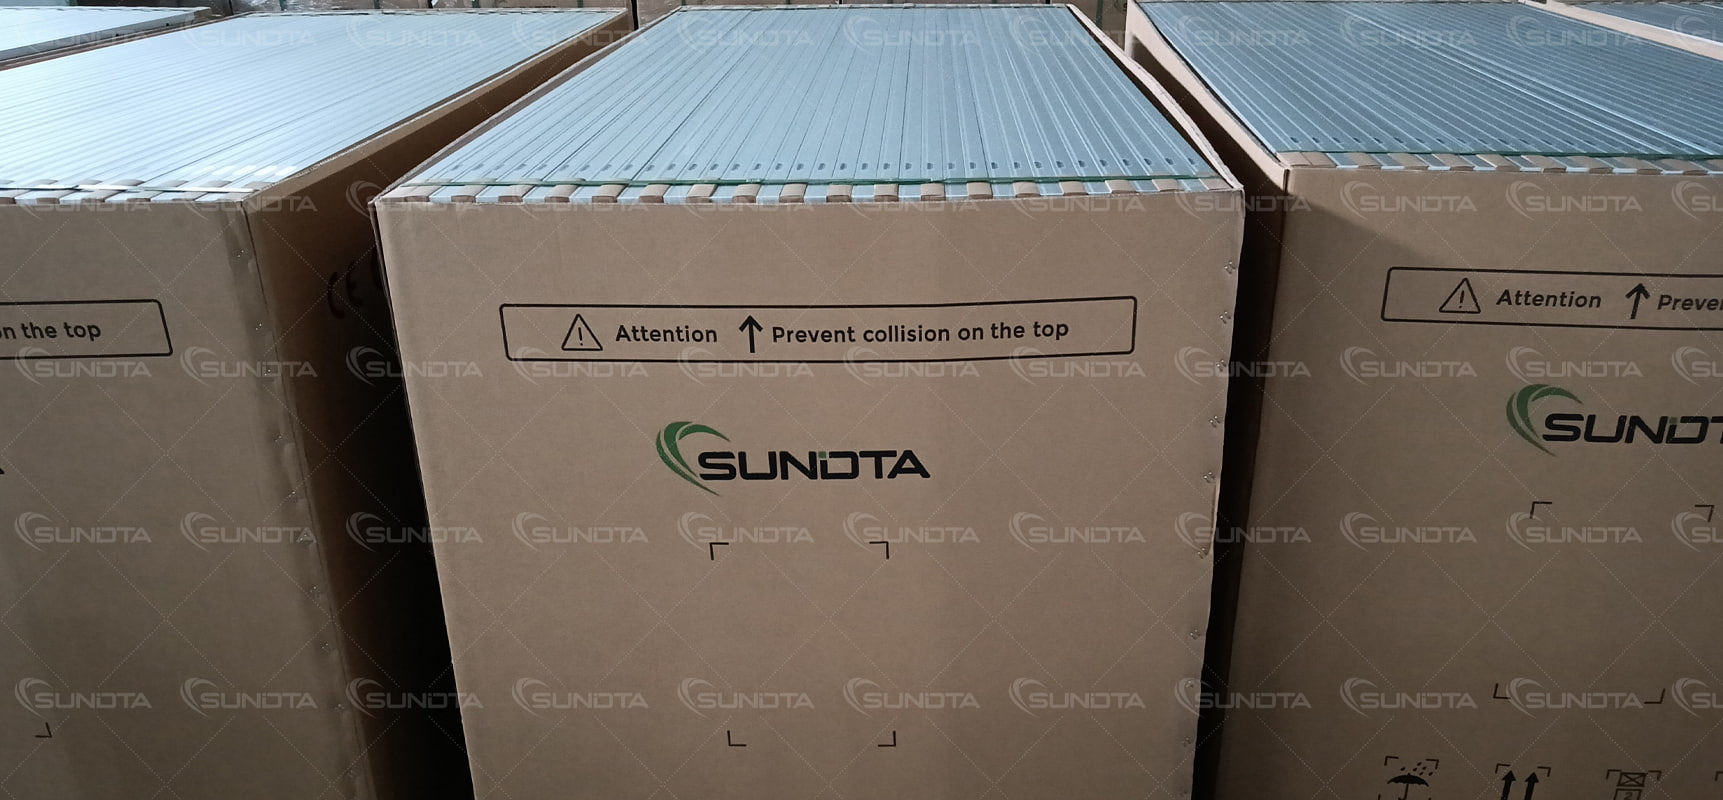 Three containers of SUNDTA 550W solar panels have been packed and will be shipped to Cambodia.